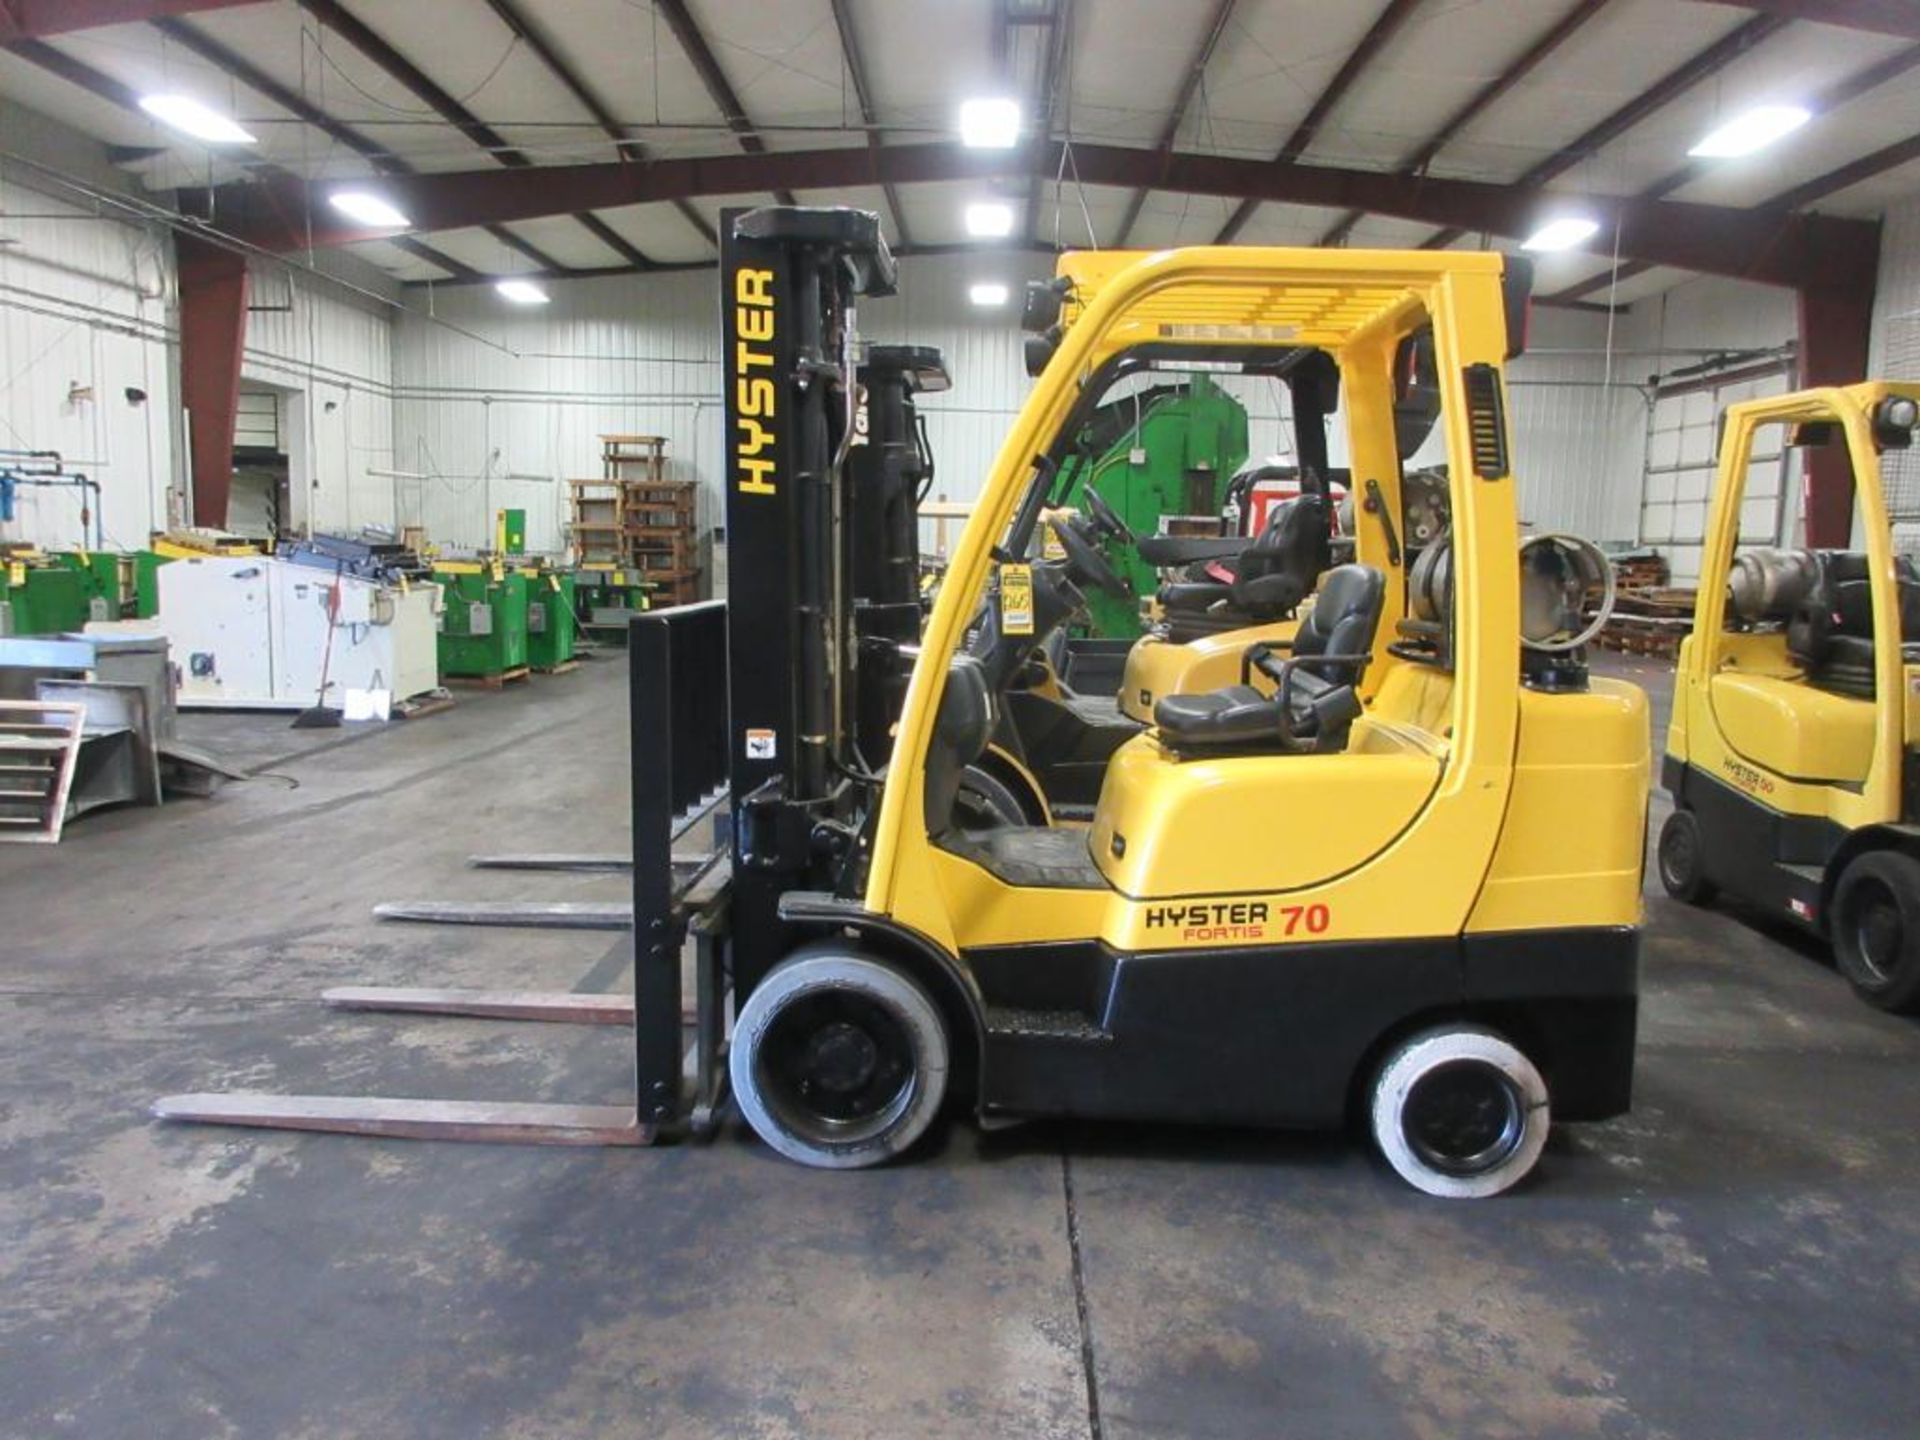 2009 HYSTER 7,000-LB. CAP. LPG FORKLIFT, 3-STAGE MAST, 187 IN. MAX. LOAD HT., CUSHION TIRES, LEVER - Image 3 of 6